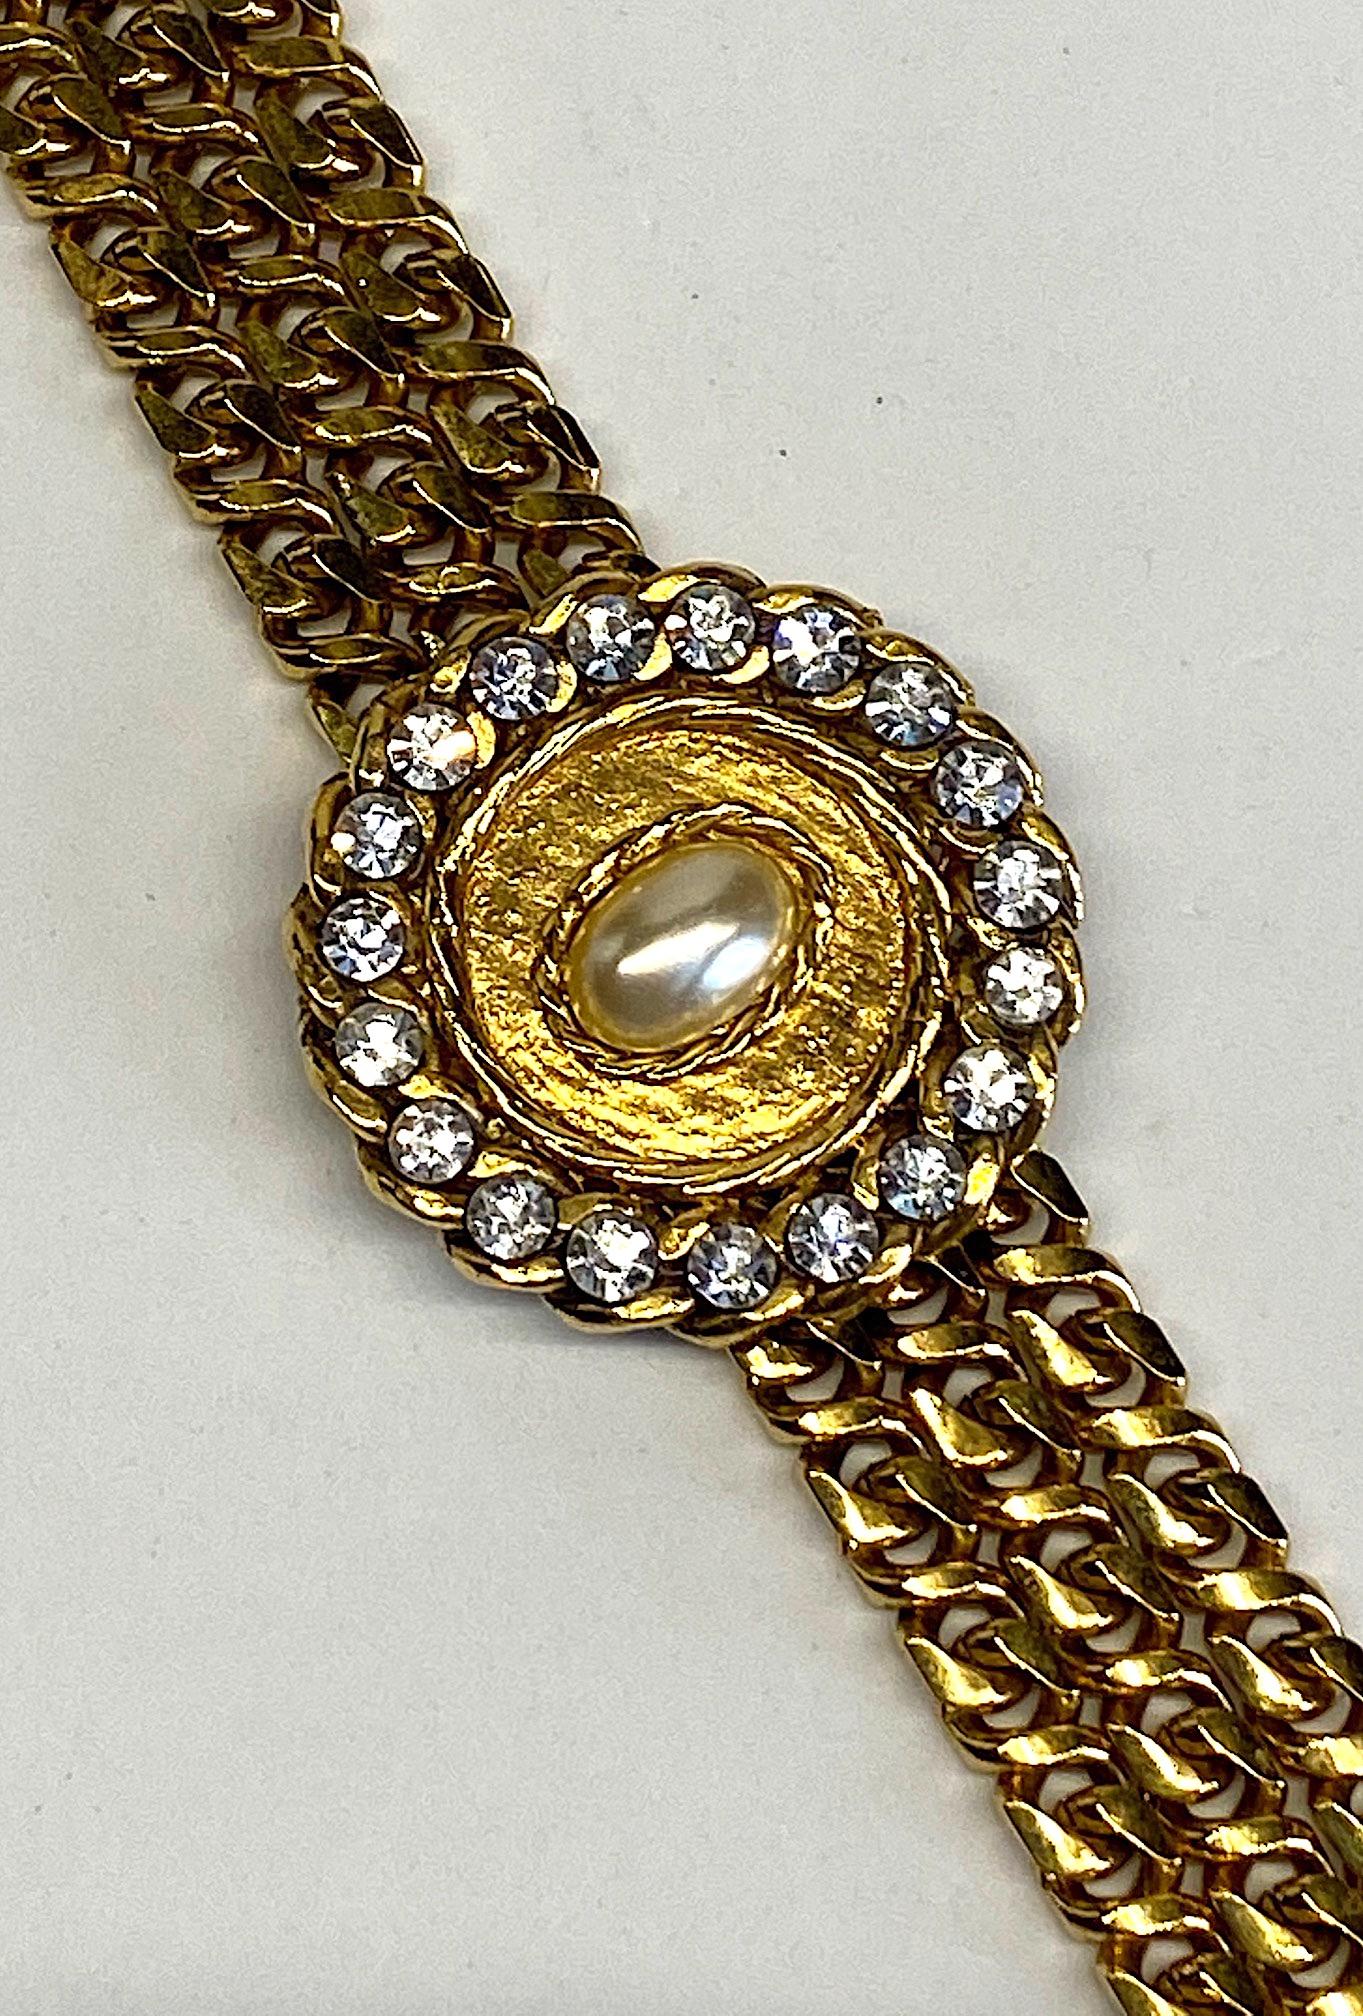 1980s three strand curb link chain bracelet with large center medallion. Each of the three strands of gold plate chain measure .25 on an inch wide and .13 of an inch thick. The large central medallion measures 1.63 in diameter. It has a central oval